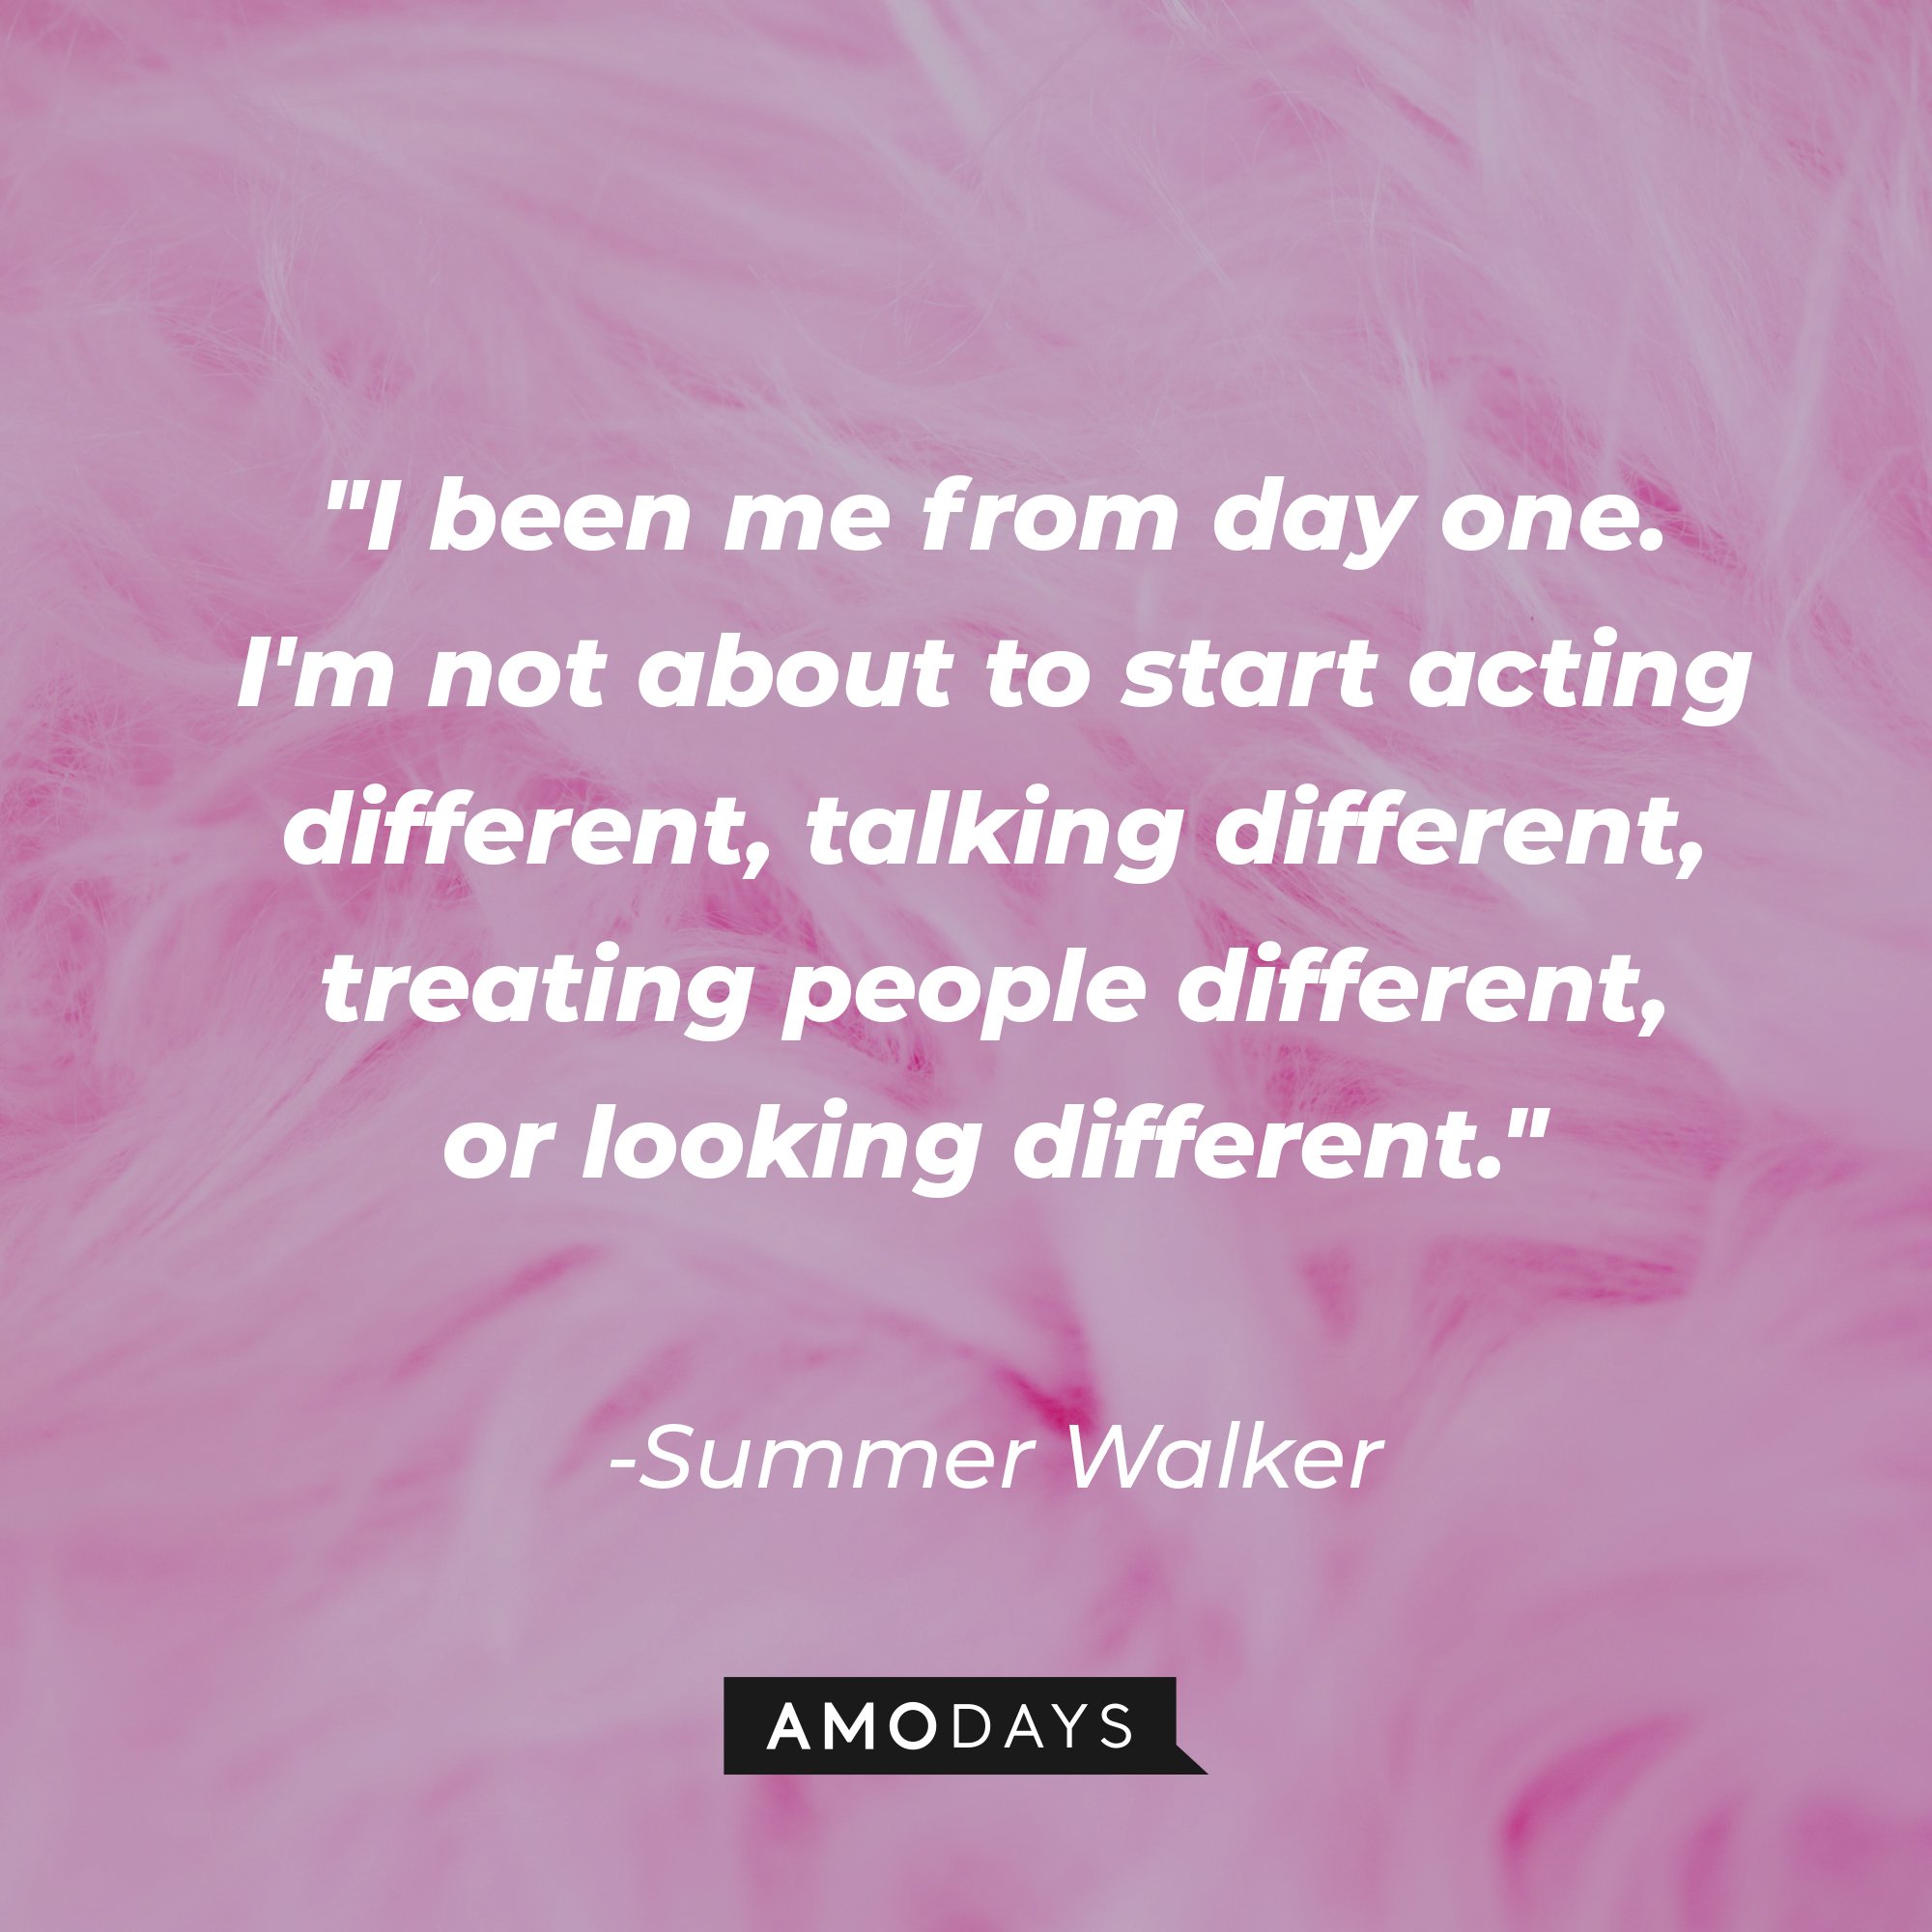 Summer Walker's quote: "I been me from day one. I'm not about to start acting different, talking different, treating people different, or looking different." | Image: AmoDays